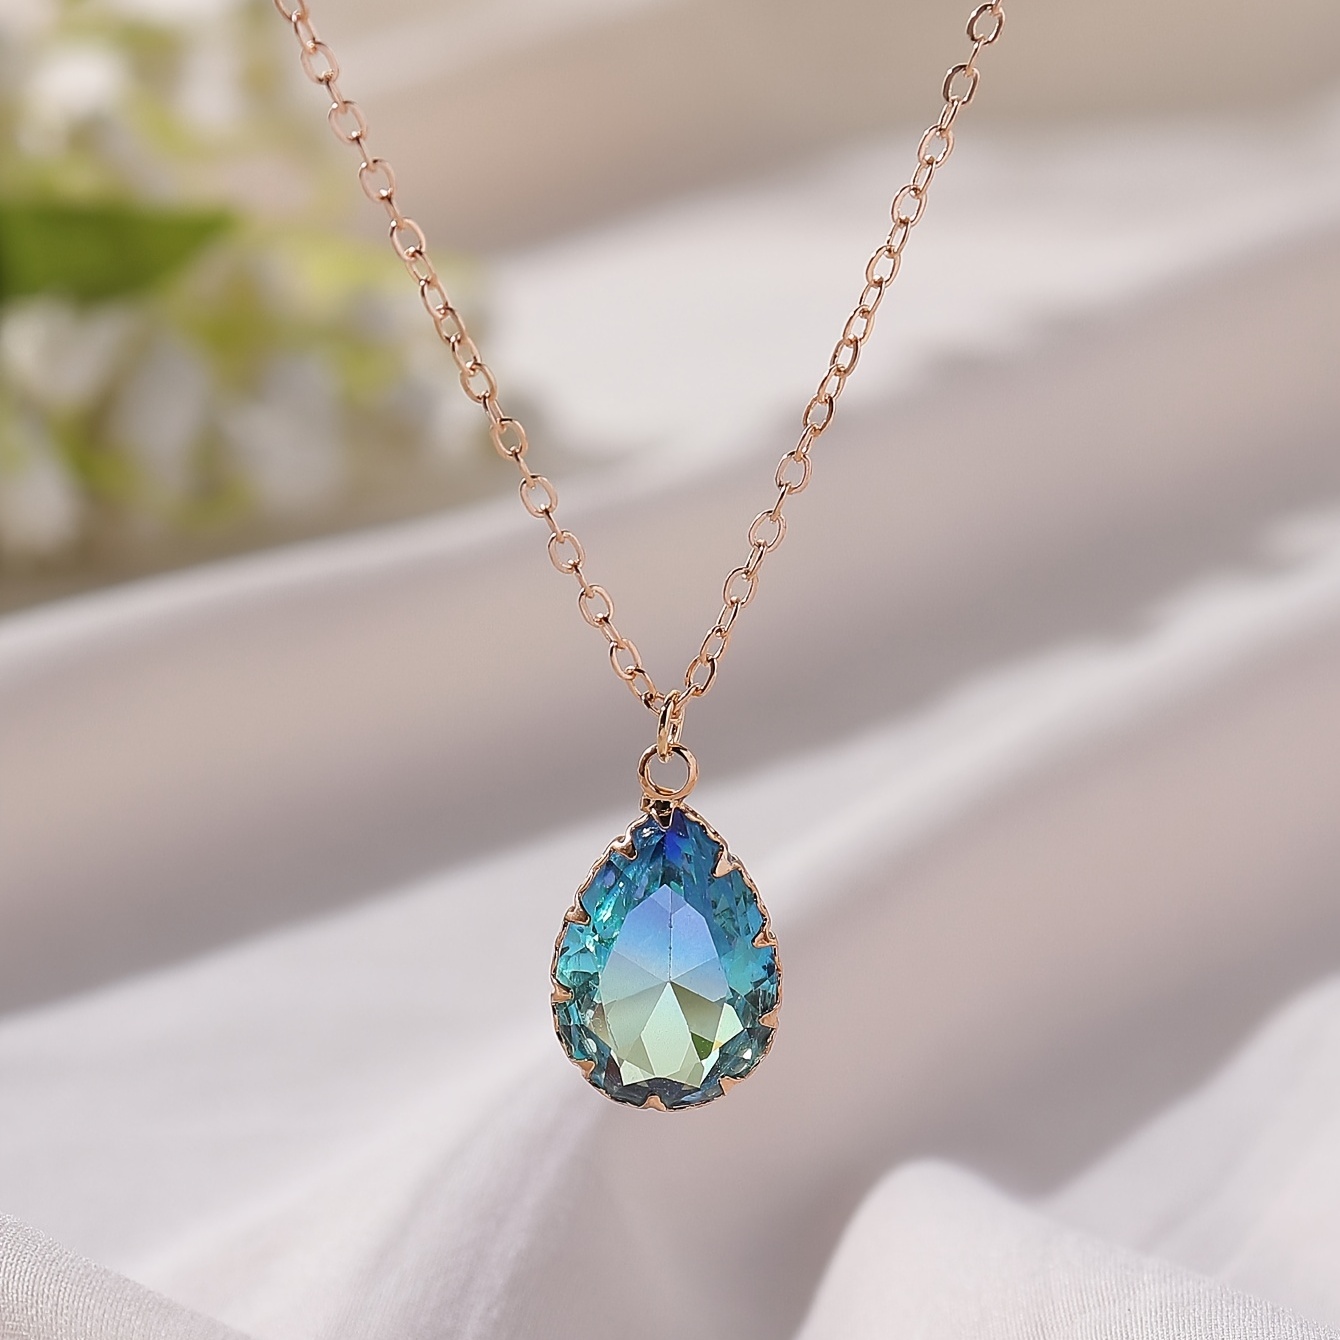 Colorful Crystal Necklace Water Drop Synthetic Gemstones Shiny Neck Chain Wedding Anniversary Gift